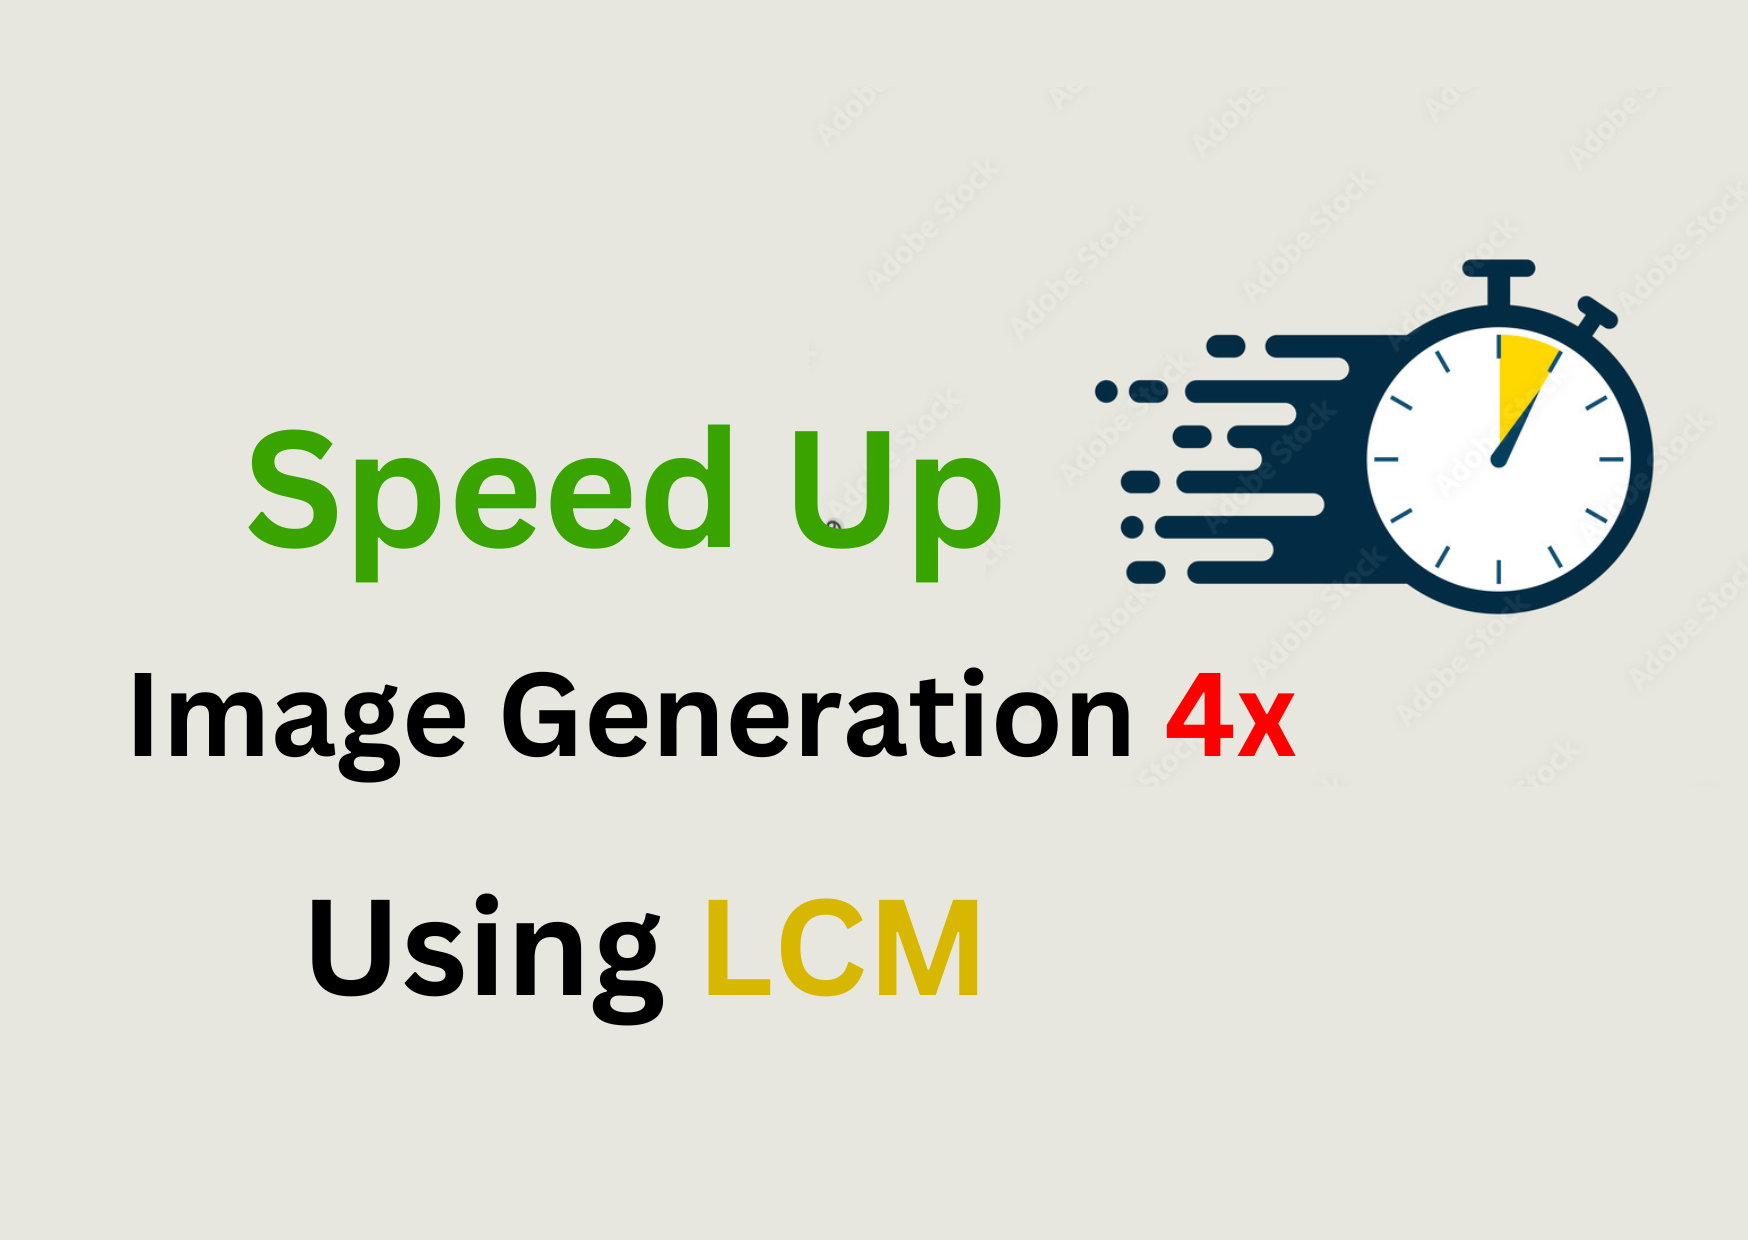 Speed Up Image Generation by 4x: Using LCM